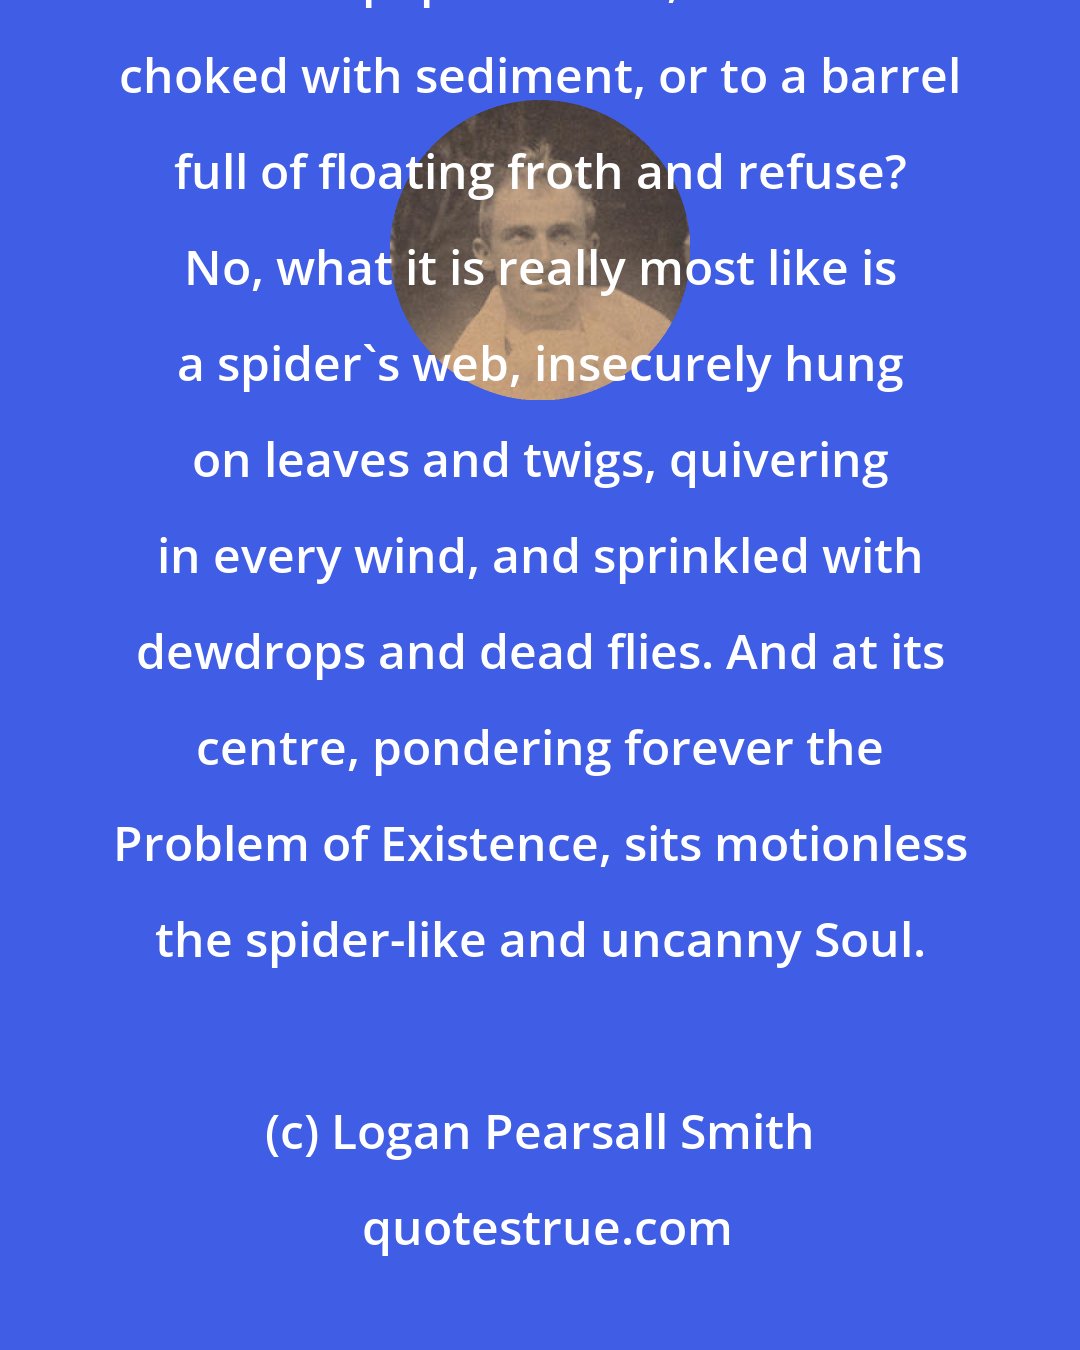 Logan Pearsall Smith: What shall I compare it to, this fantastic thing I call my Mind? To a waste-paper basket, to a sieve choked with sediment, or to a barrel full of floating froth and refuse? No, what it is really most like is a spider's web, insecurely hung on leaves and twigs, quivering in every wind, and sprinkled with dewdrops and dead flies. And at its centre, pondering forever the Problem of Existence, sits motionless the spider-like and uncanny Soul.